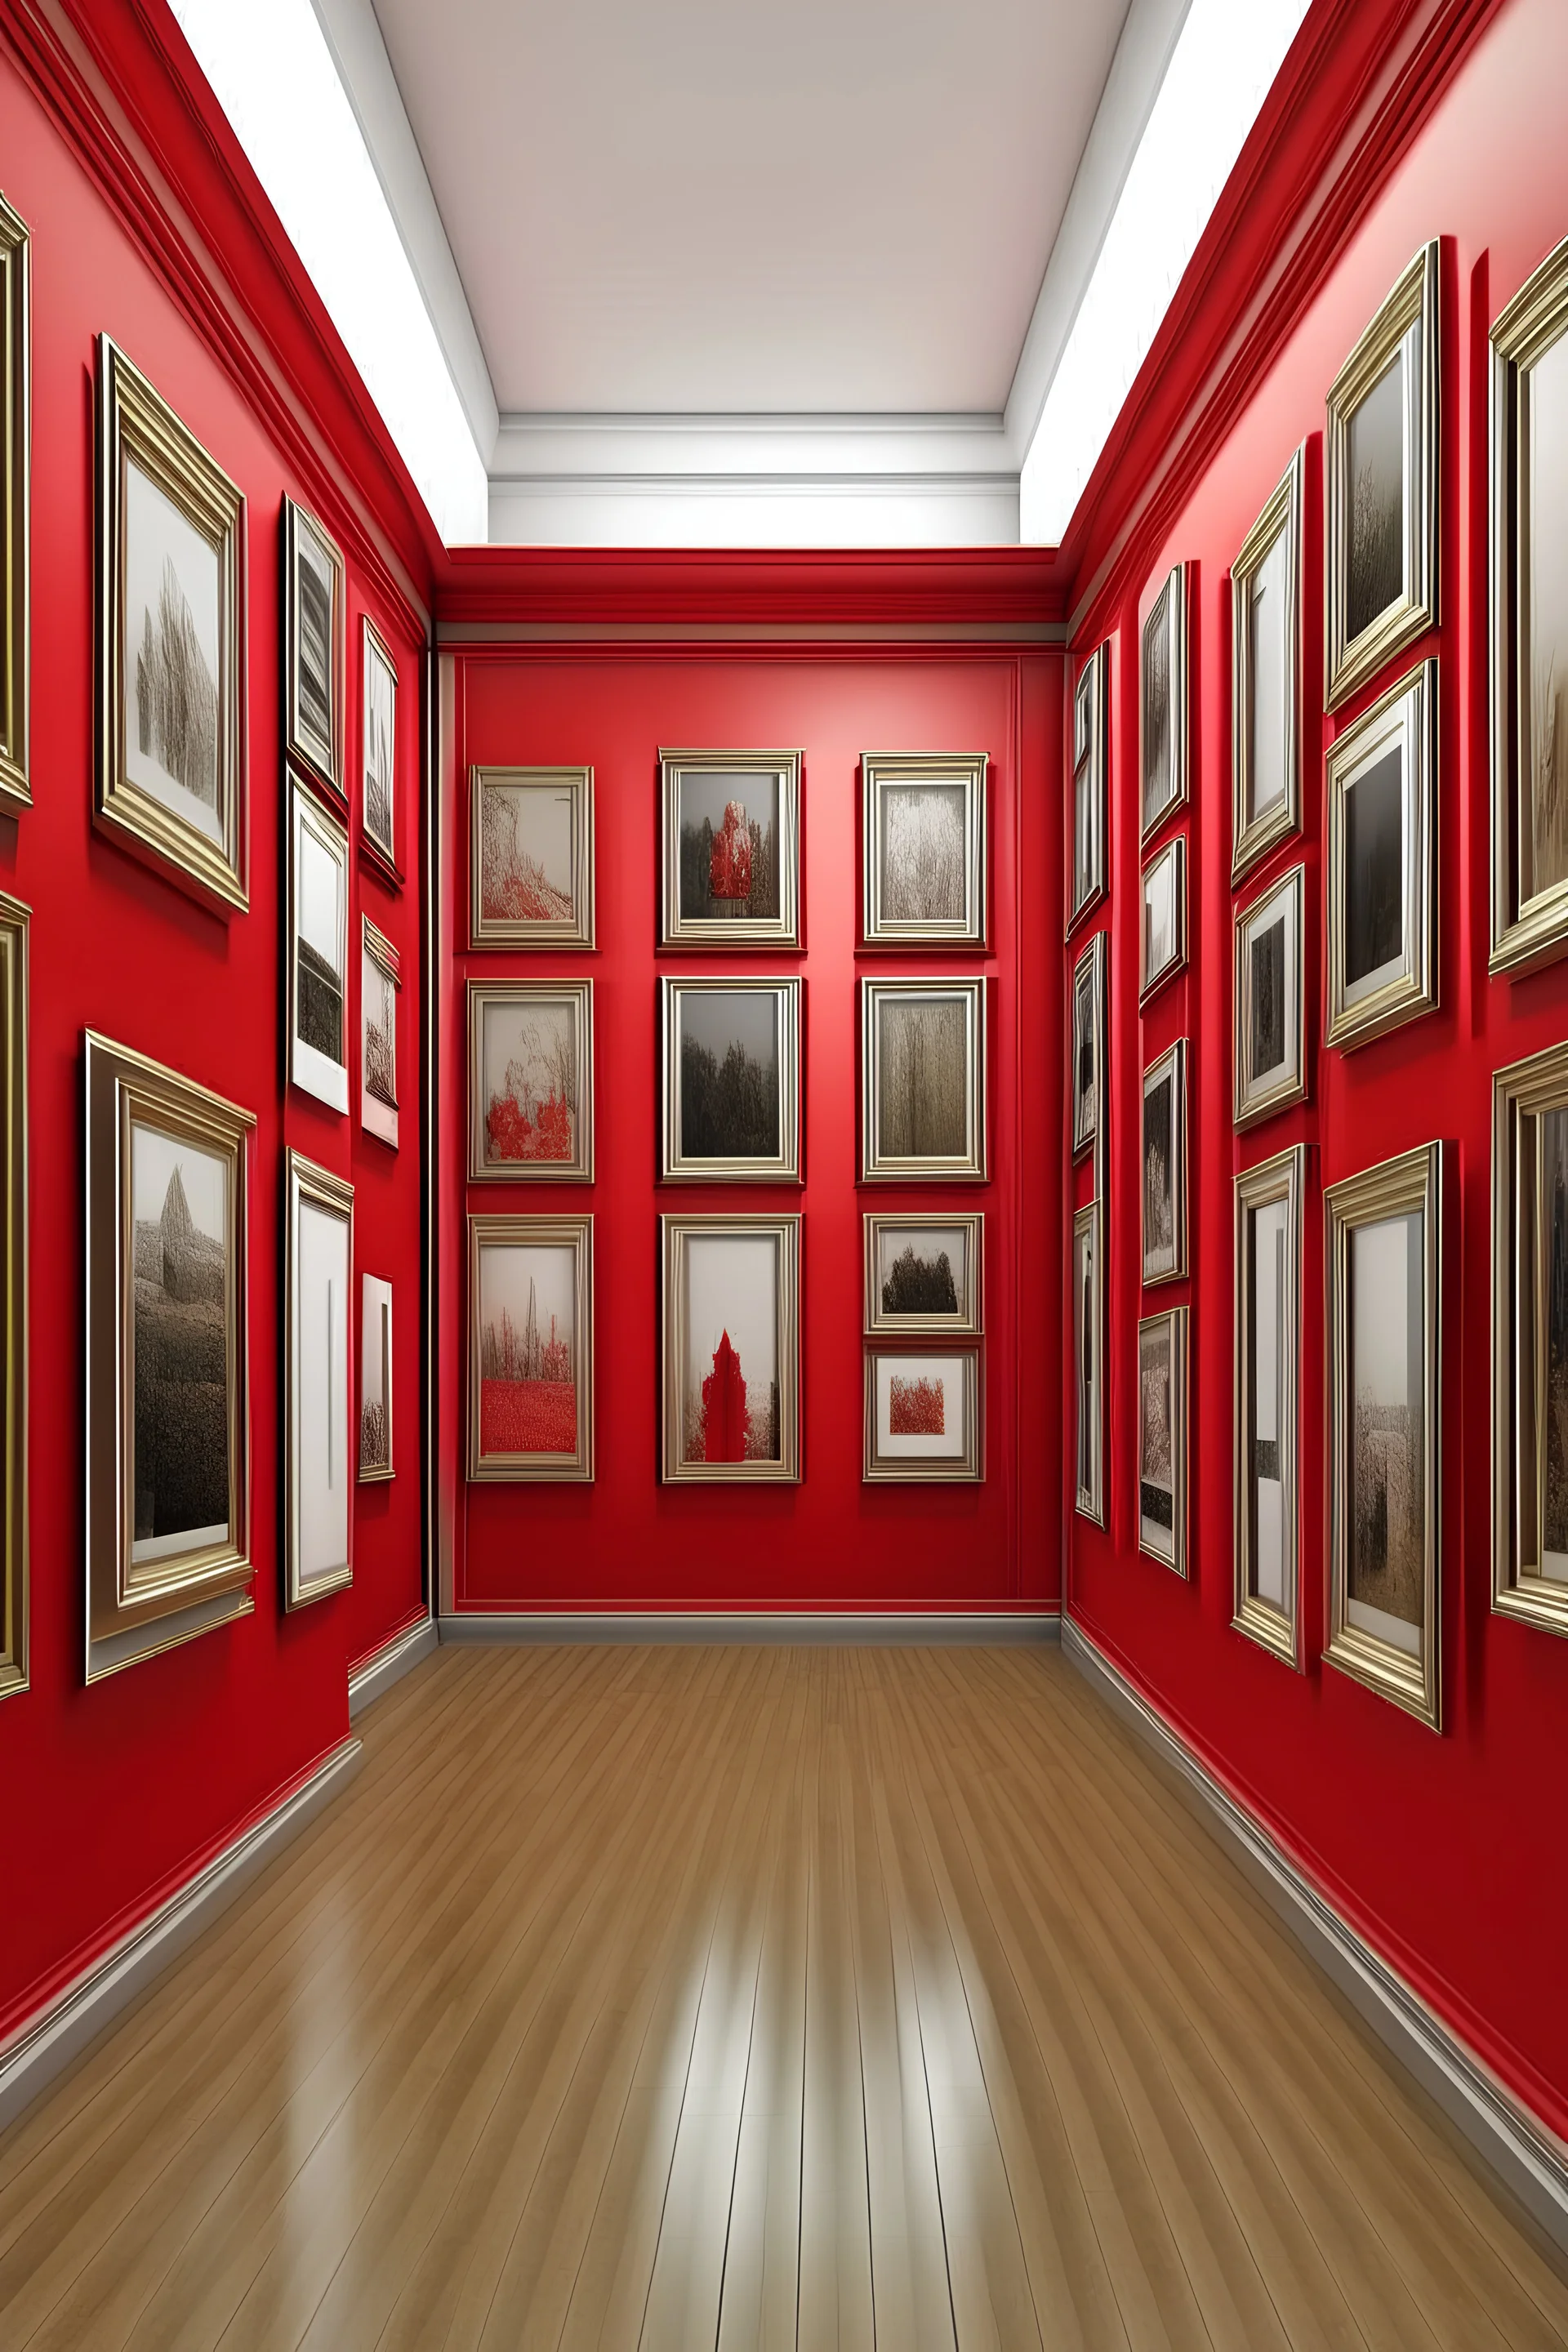 Realistic pictures, as if they were taken professionally, a frame without a picture, wrapped in a bright red cloth, in a hall containing many frames without pictures.